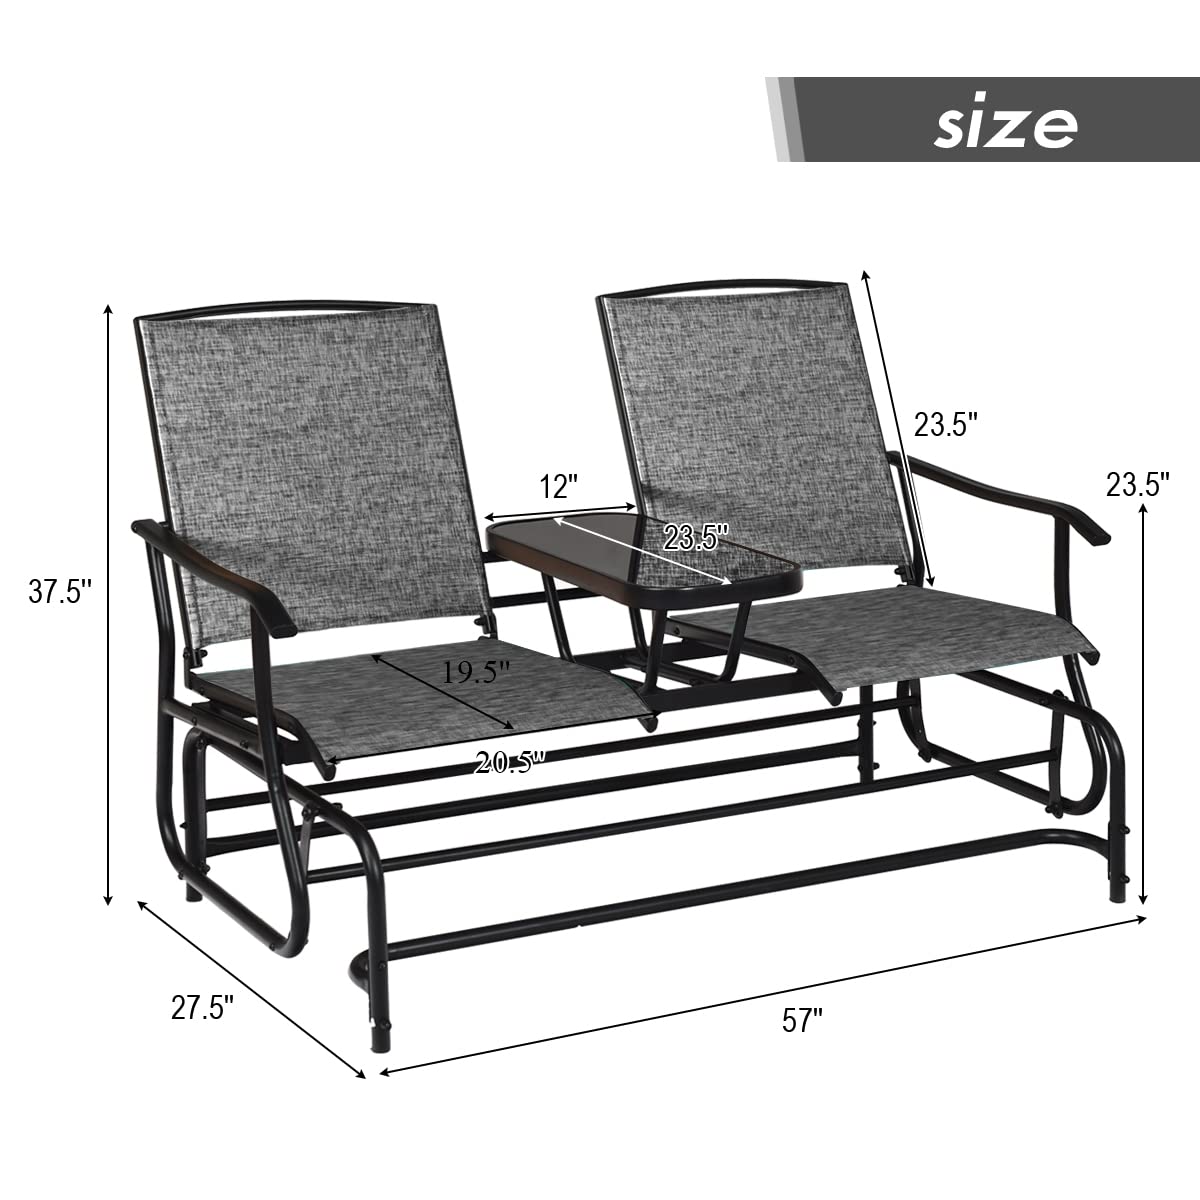 Giantex Patio Bench Glider Chair with Metal Frame, Center Tempered Glass Table, Outside Double Rocking Swing Loveseat for Porch, Garden, Poolside, Balcony, Lawn Rocker Outdoor Glider Bench(Gray)